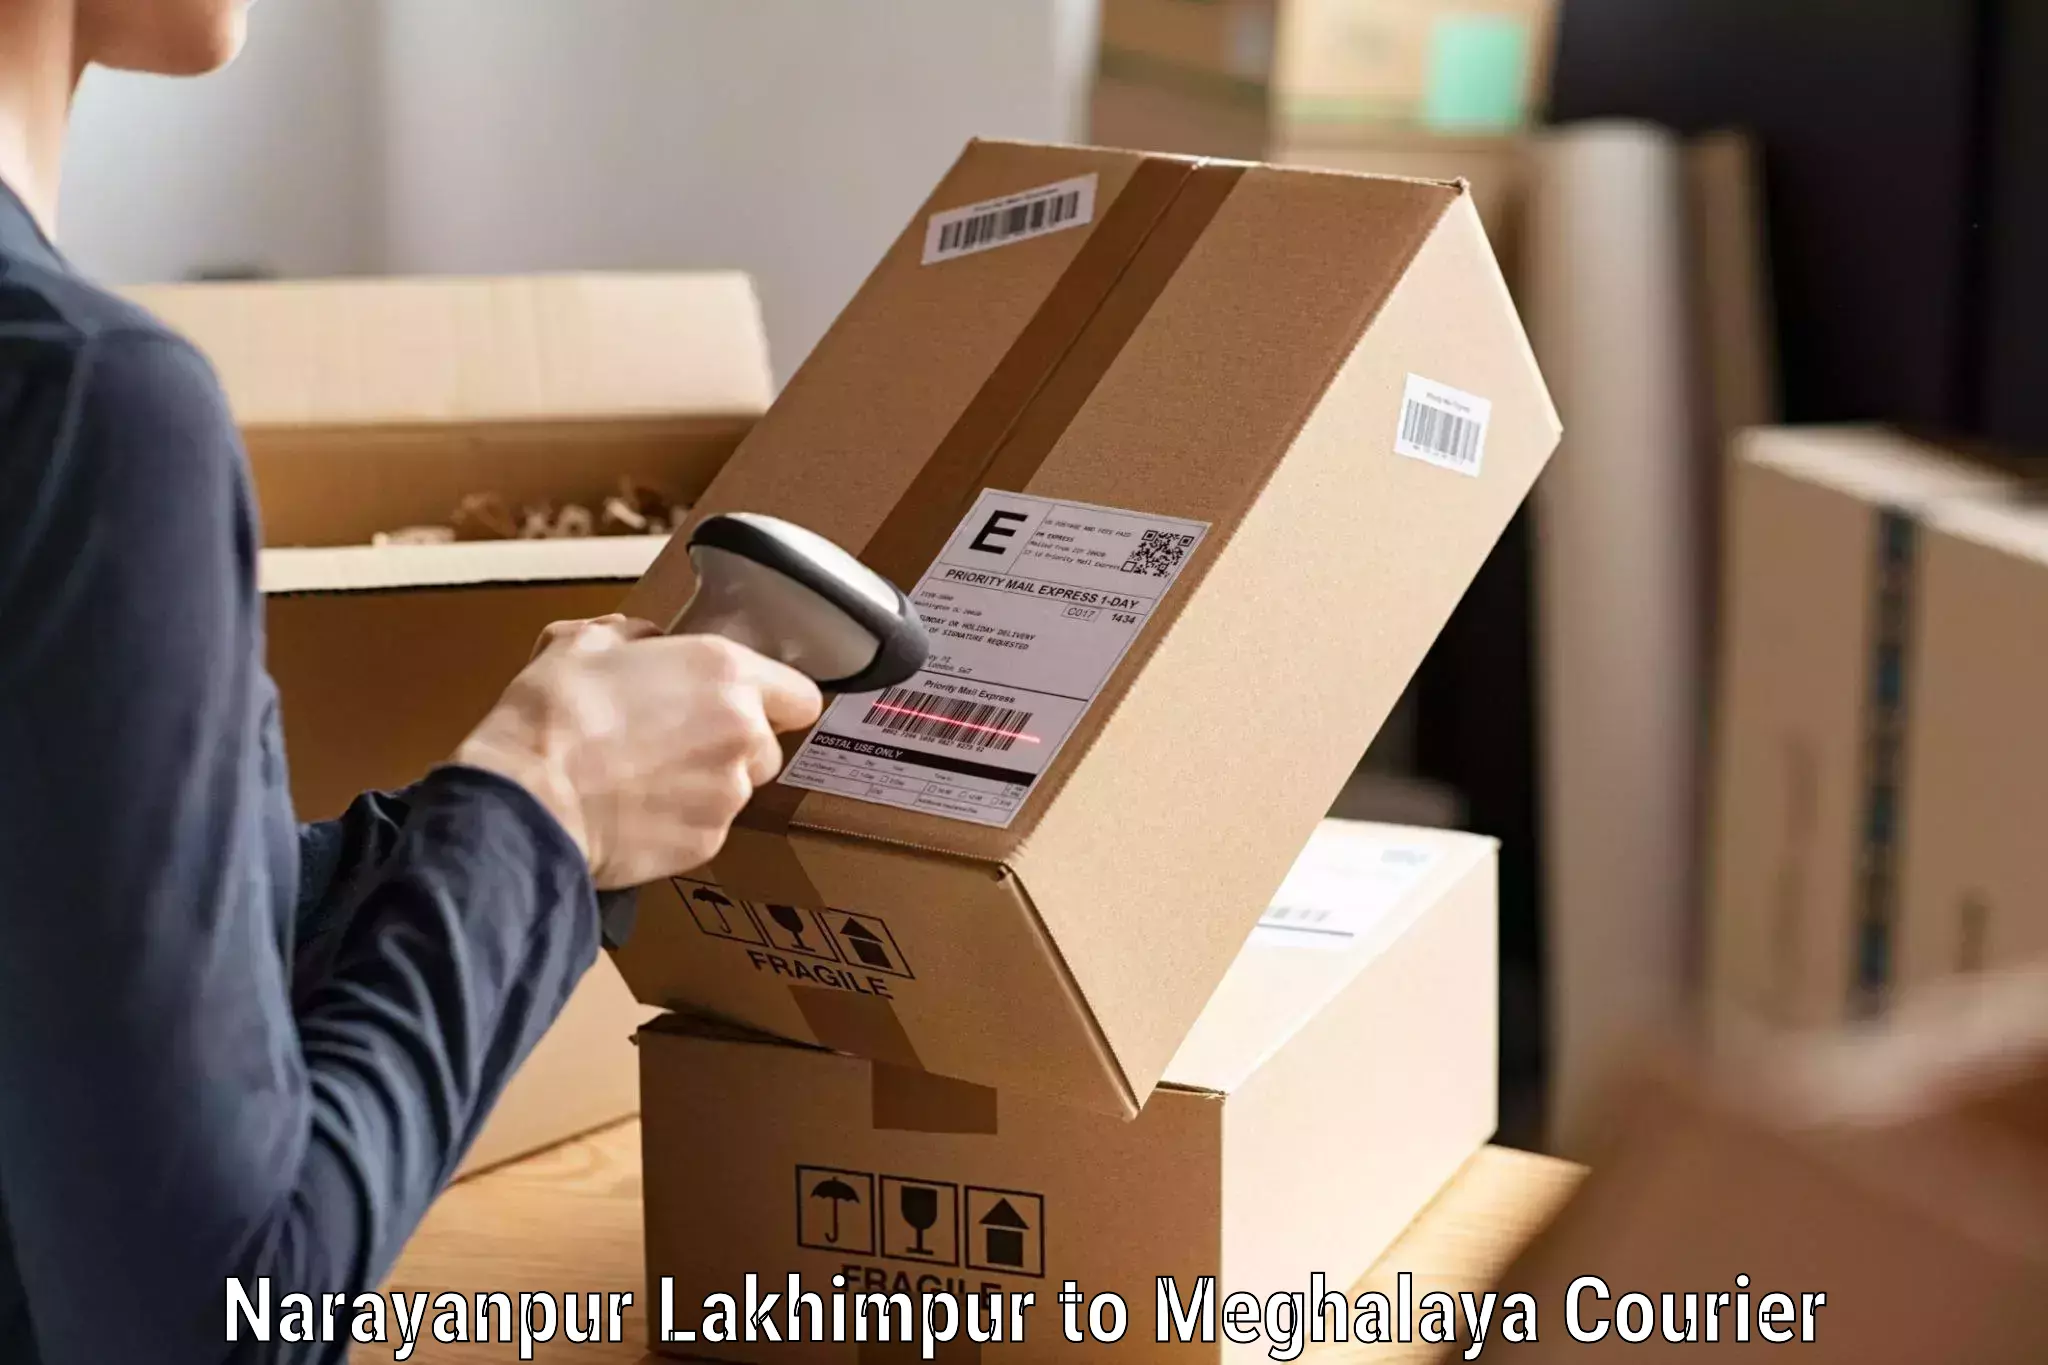 Efficient courier operations Narayanpur Lakhimpur to Williamnagar